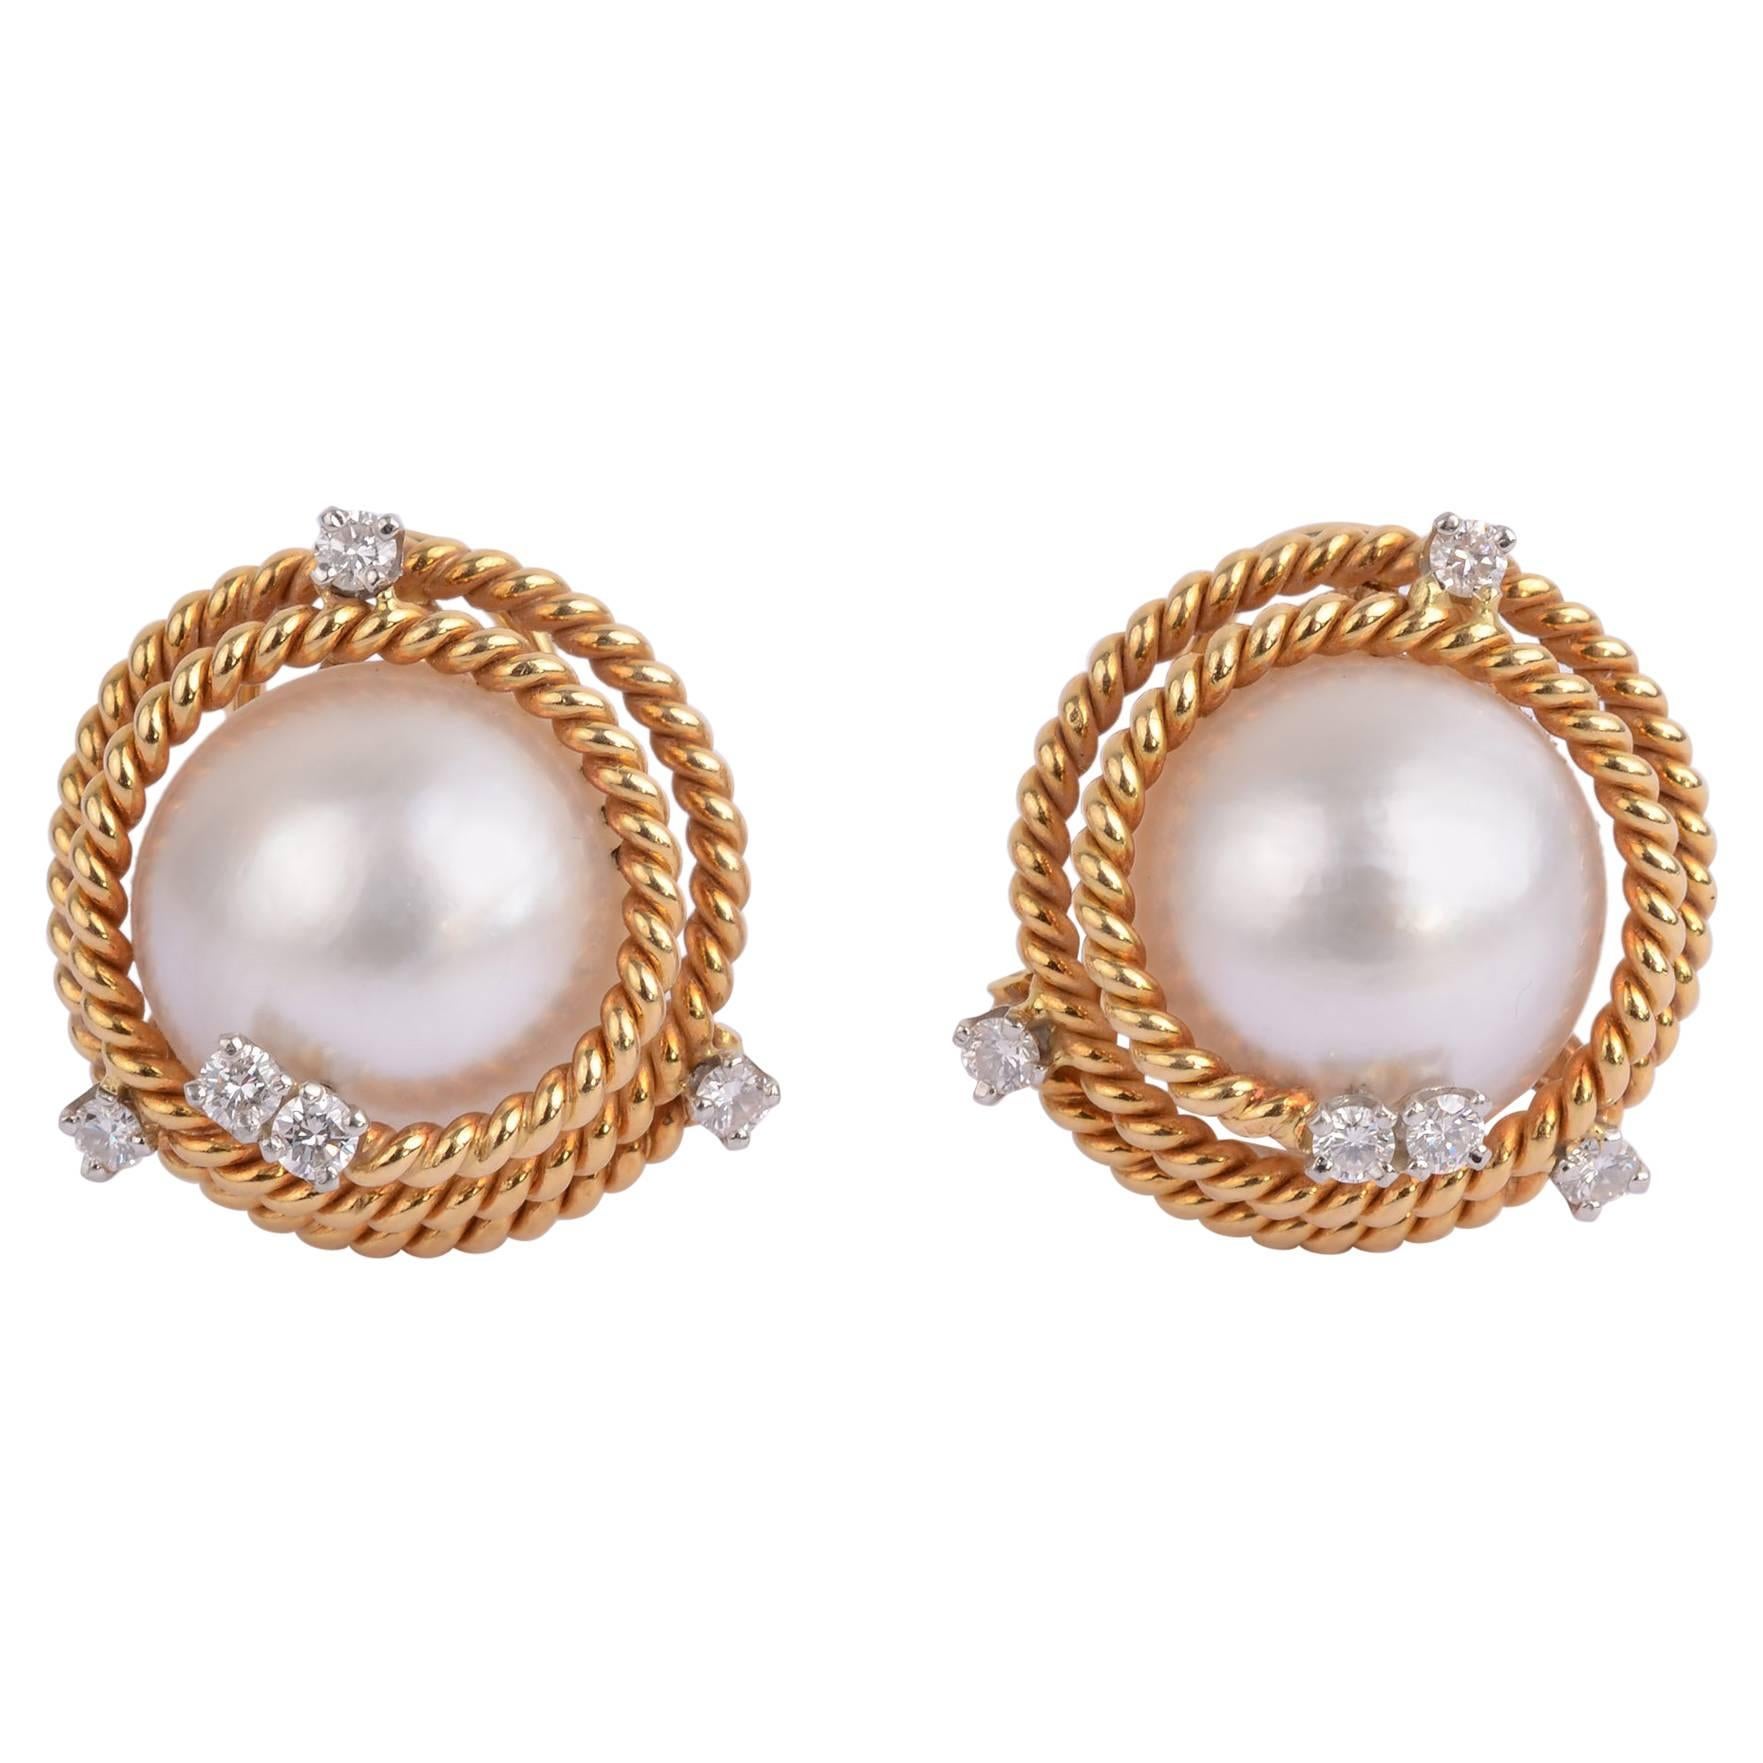 Schlumberger for Tiffany & Co. Mabe Pearl Diamond Gold Earrings 